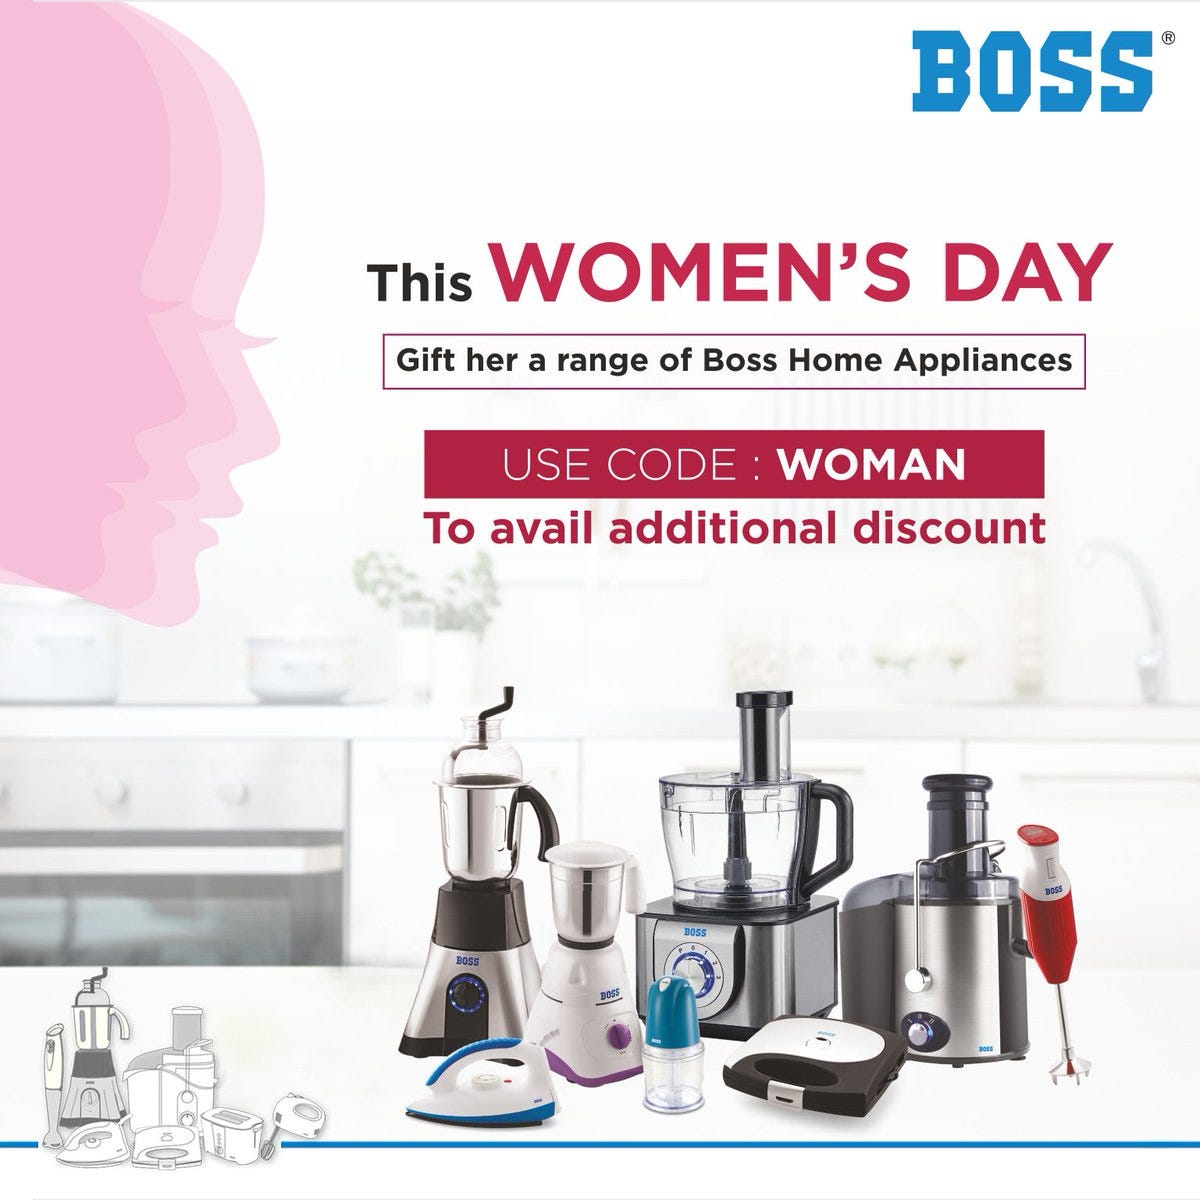 BOSS Home Appliances on X: "This Women's Day, Give her the comfort she  deserves! Use Code: WOMAN, to avail additional discount on BOSS Appliances.  Offer Valid on https://t.co/VtcI0dj0rZ. Hurry! #BOSSHomeAppliance  #WomensDayOffer #HappyWomensDay